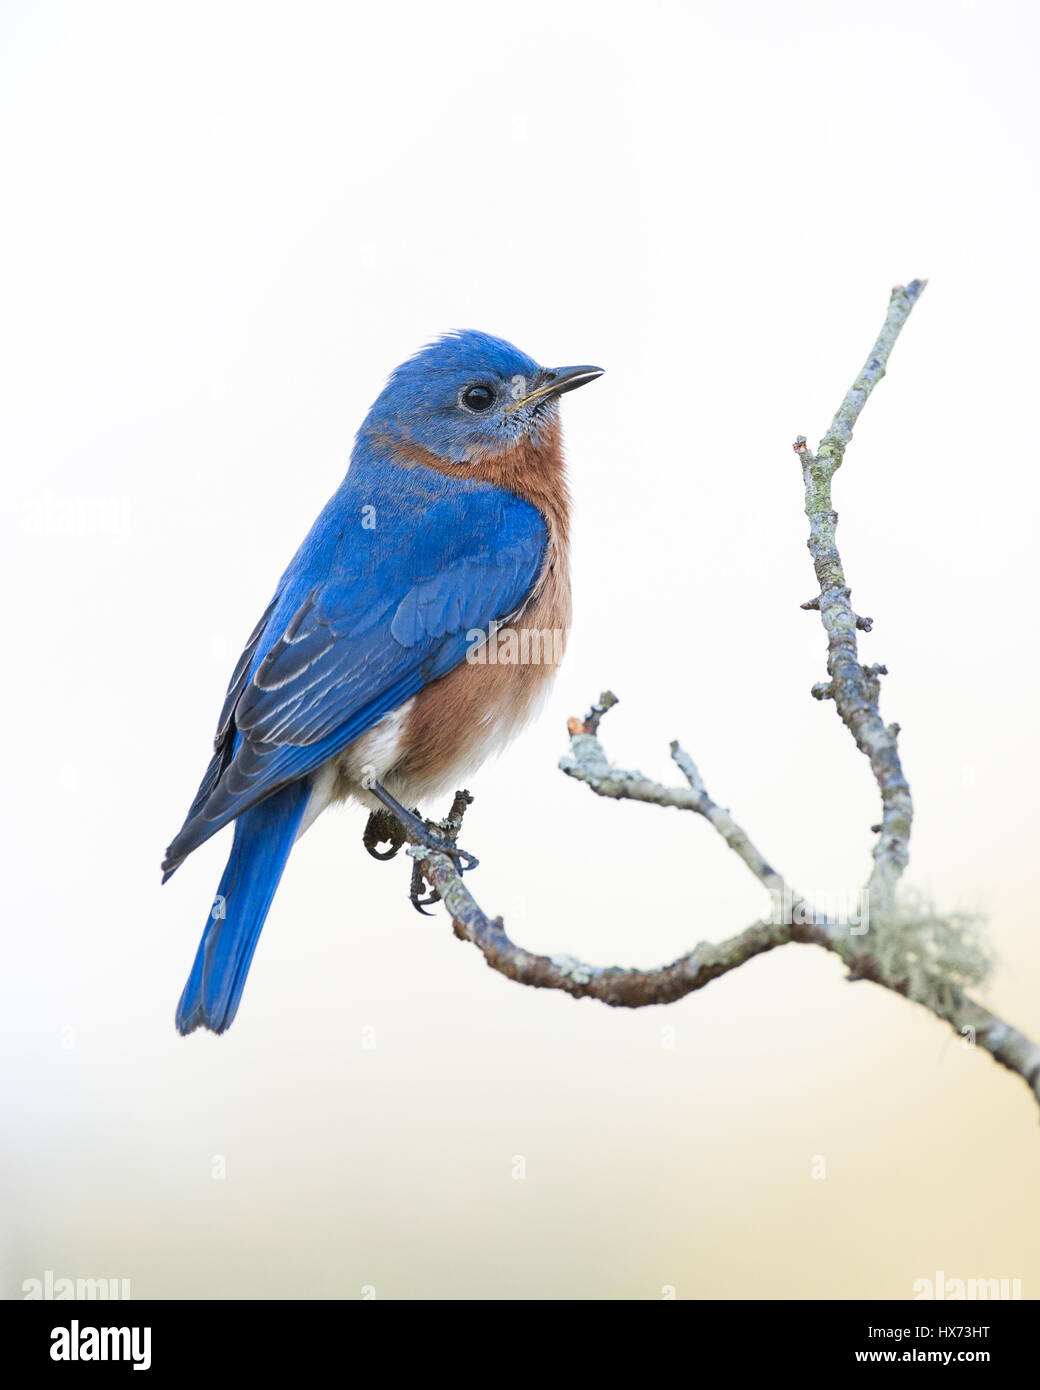 An eastern bluebird perched on a branch and calling. Stock Photo